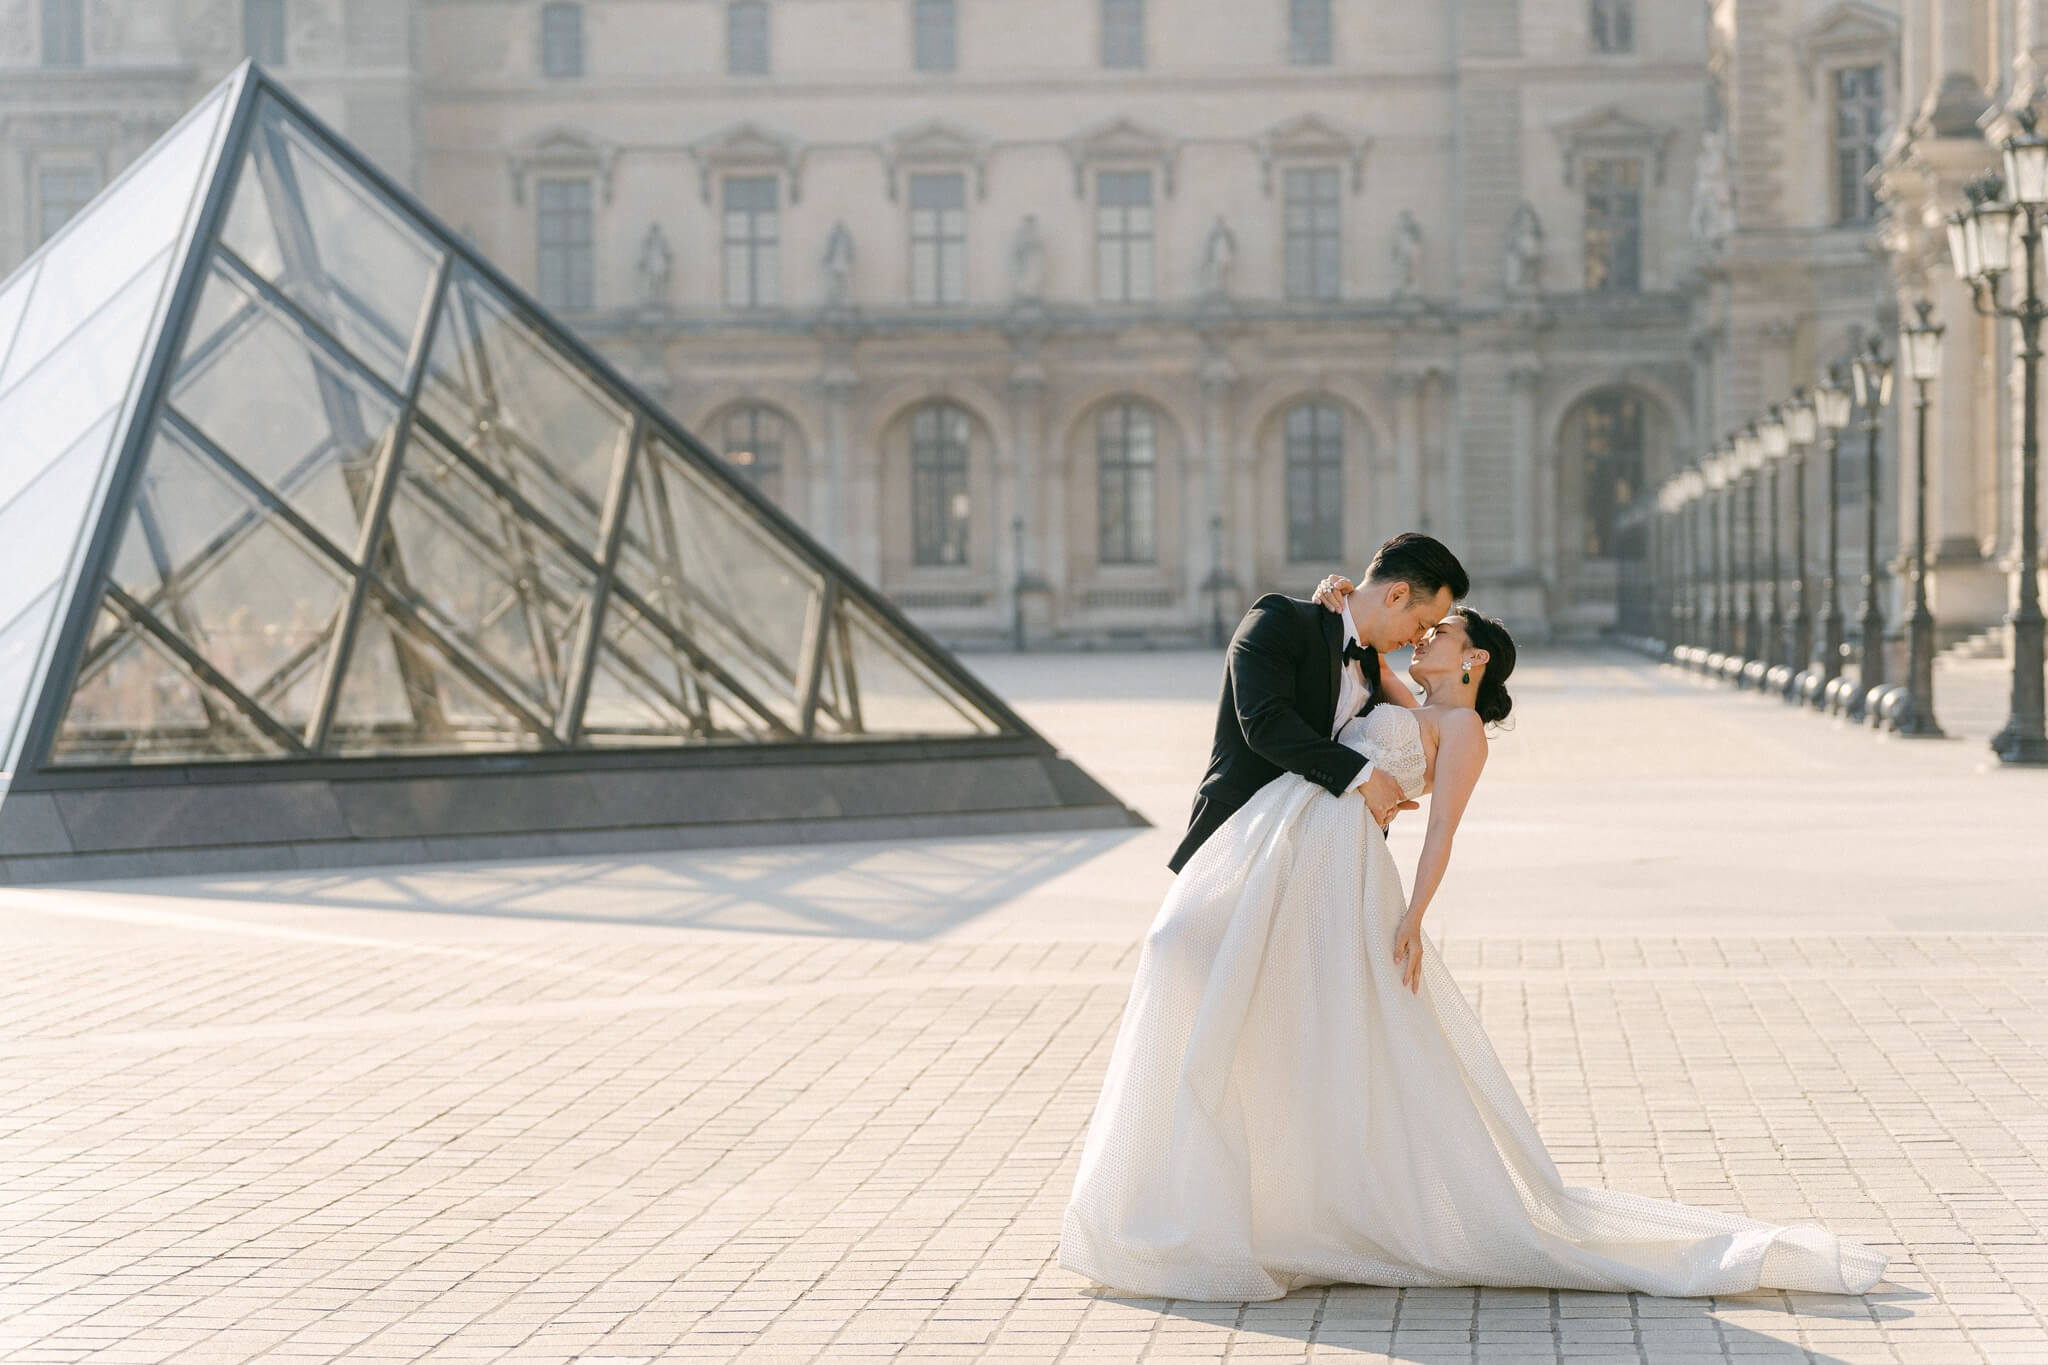 Bridal couple lovingly kissing in front of the Louvre Museum in Paris with the famous glass pyramid in the background at sunrise